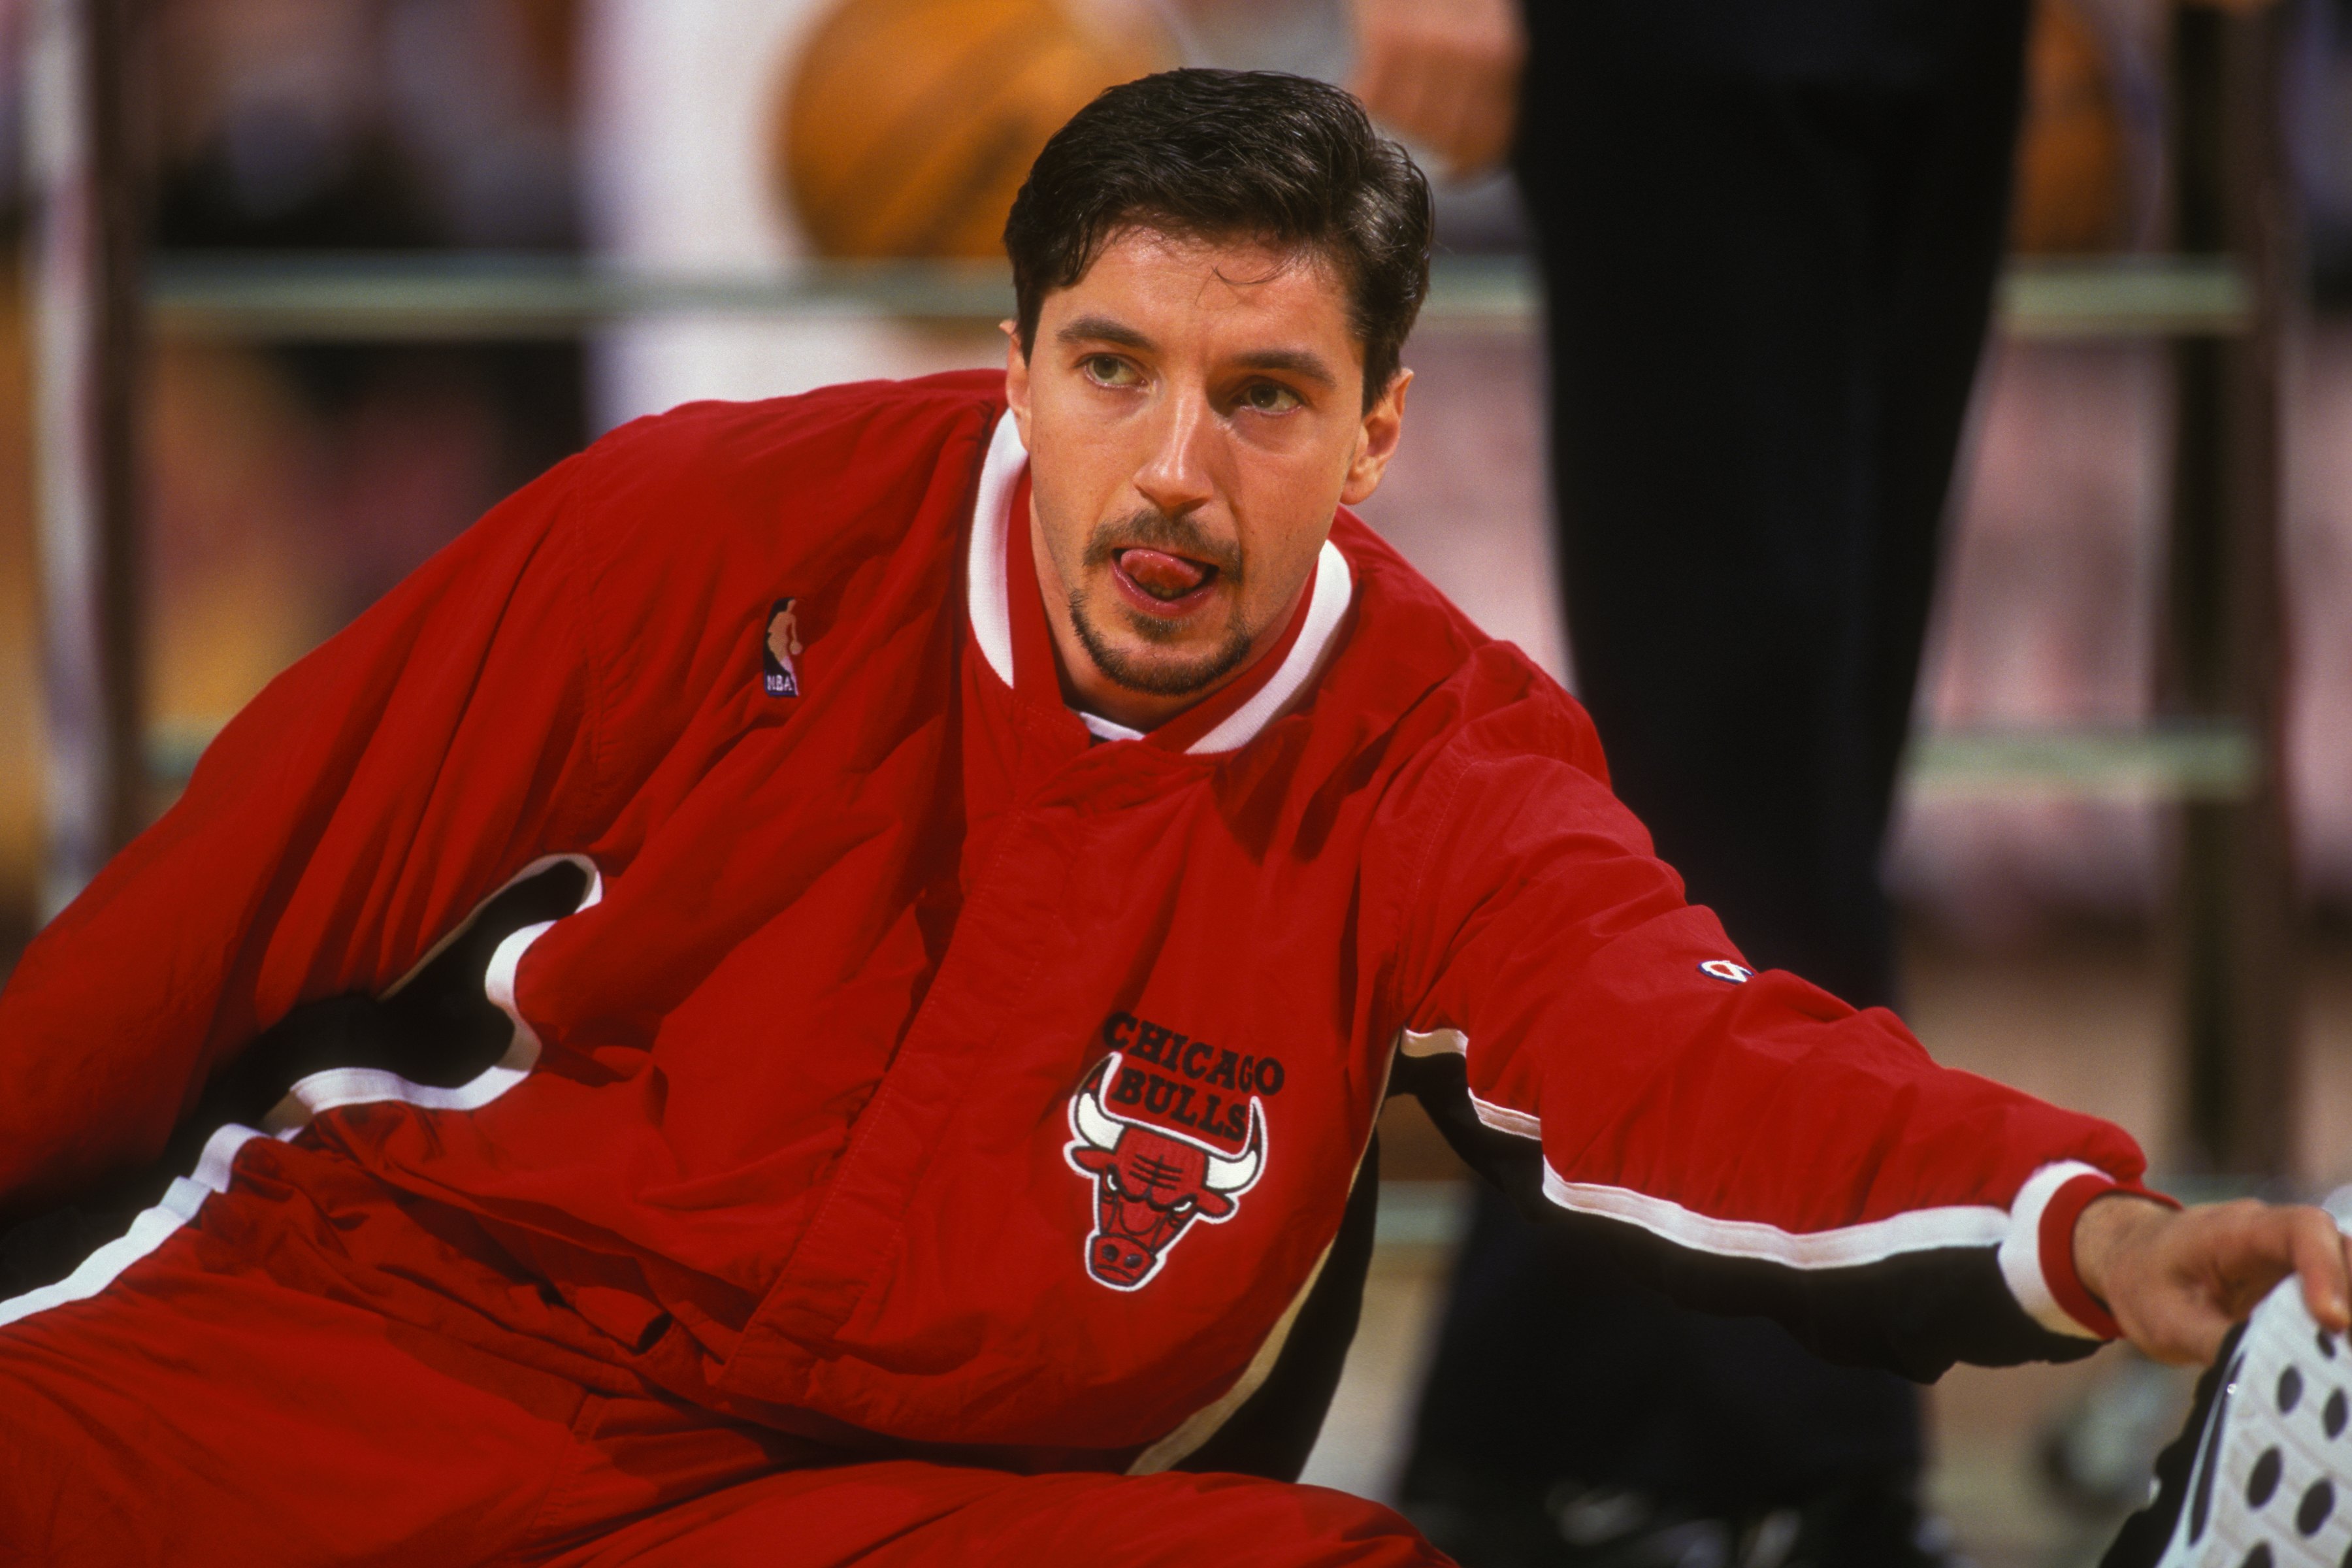 Toni Kukoc stretches before a a game during the 1996 regular season.